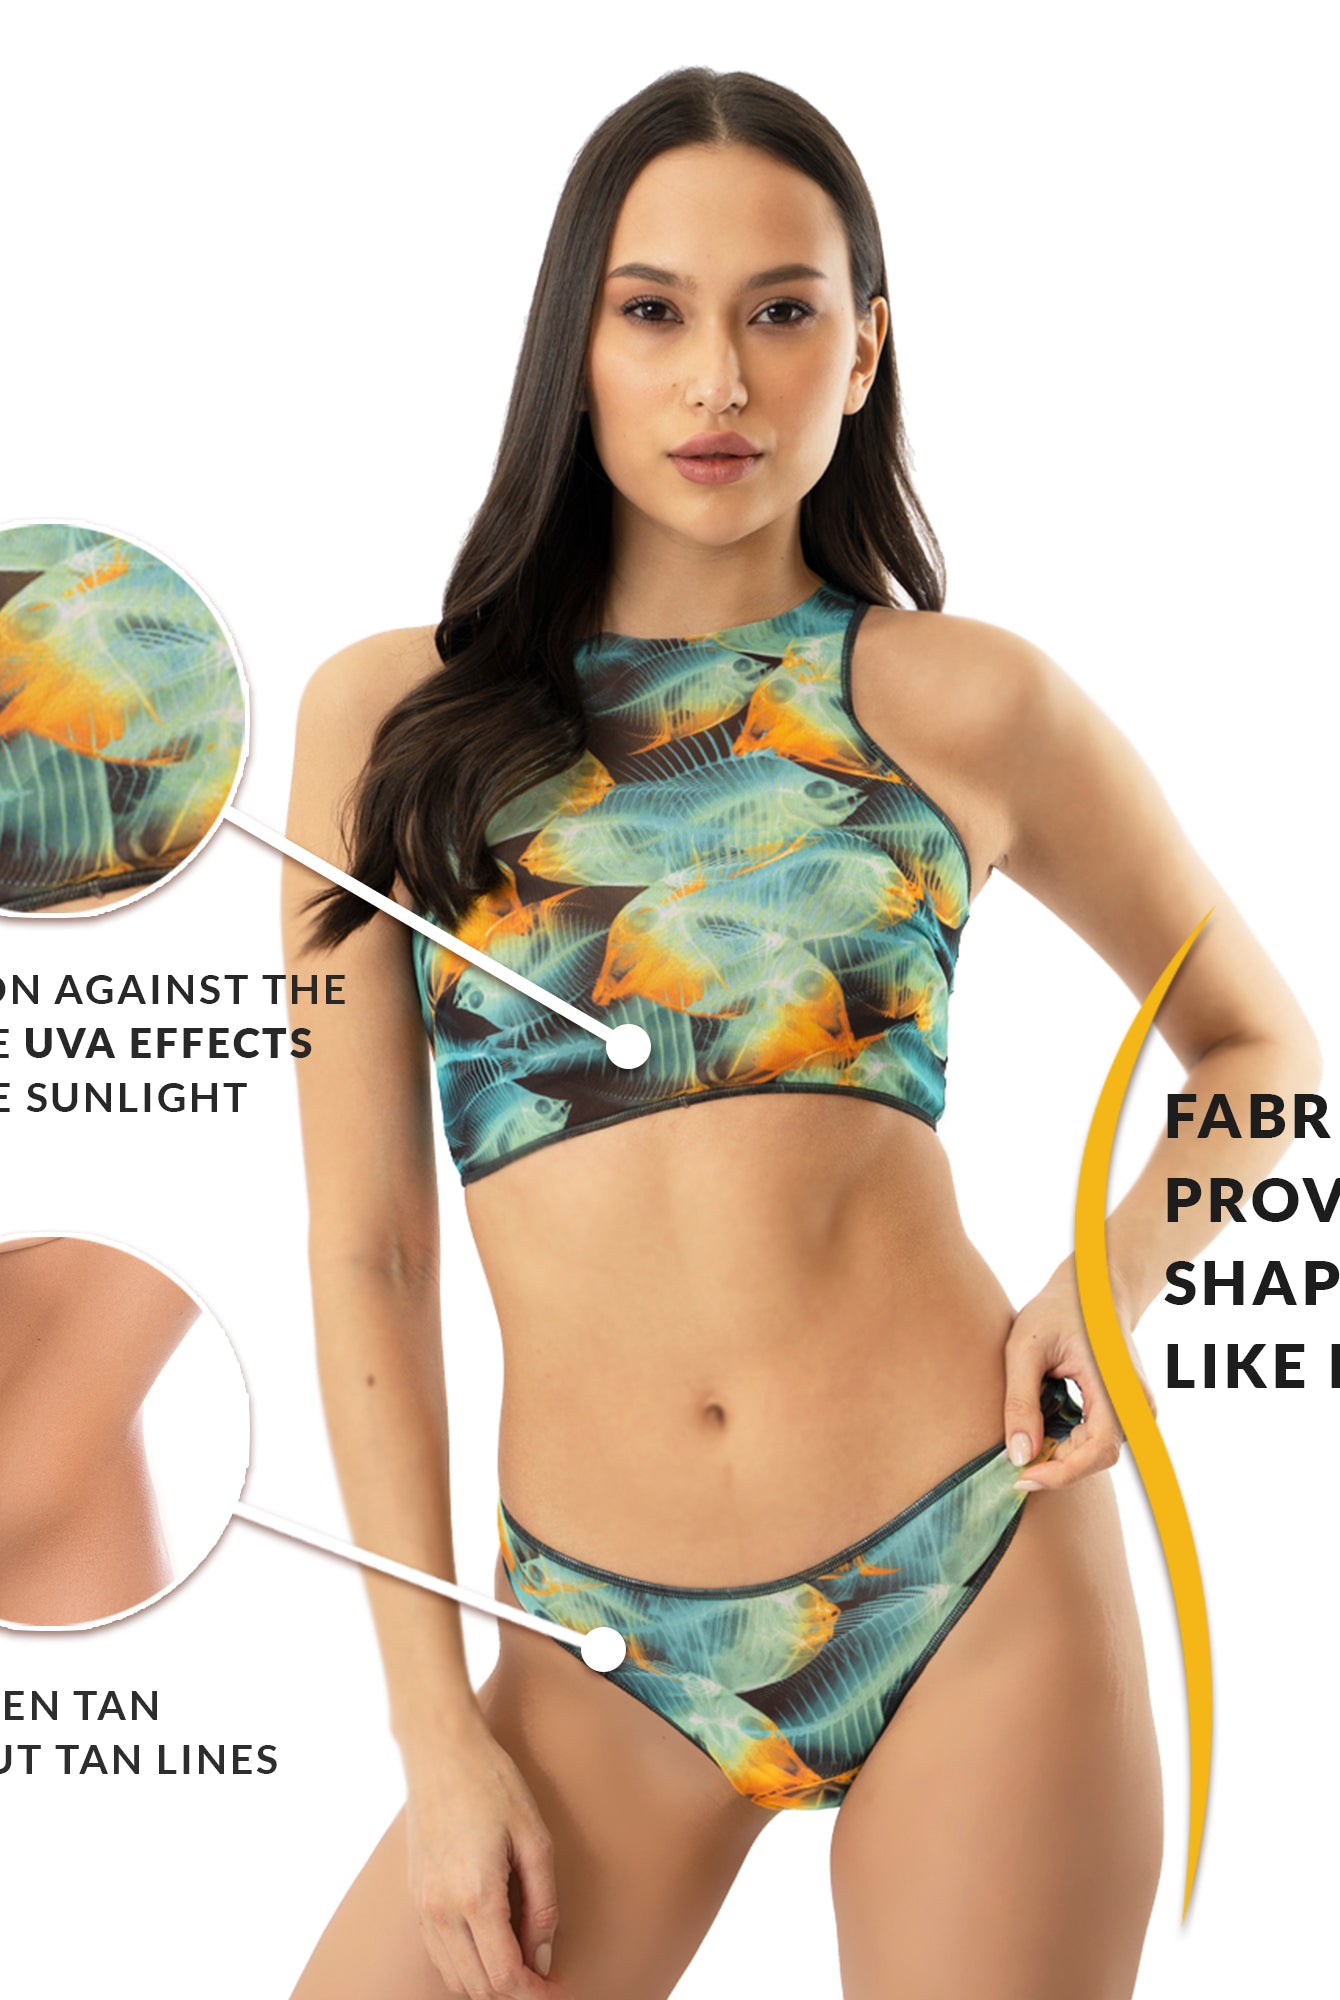 This file features sustainable tan-through smart swimsuits in a vibrant fish print. Offering SPF35 protection, these swim tops provide classic luxury for beach lovers prioritizing both style and sun safety.